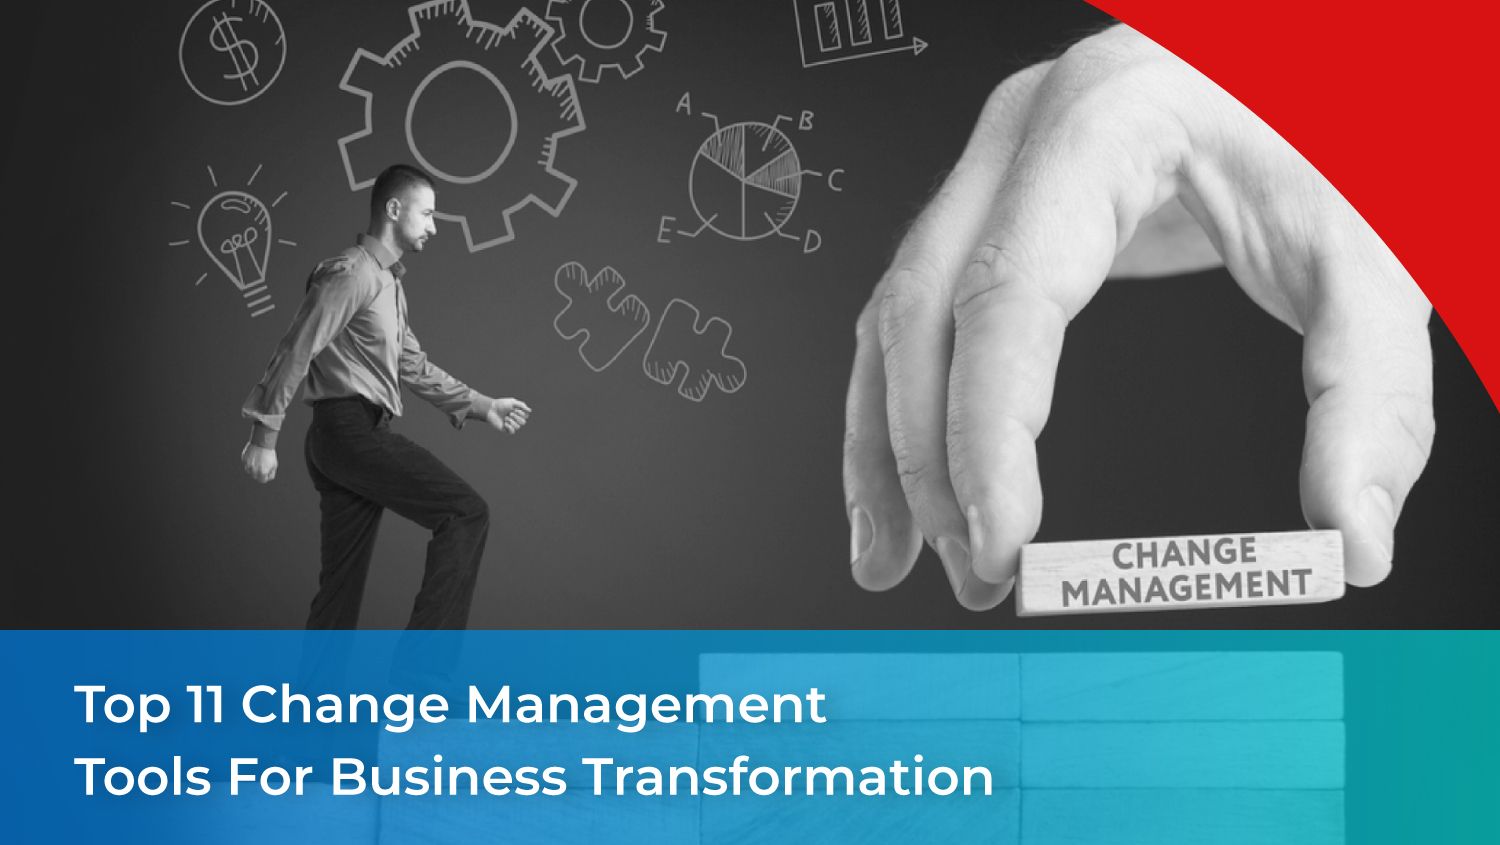 Top 11 Change Management Tools for Business Transformation